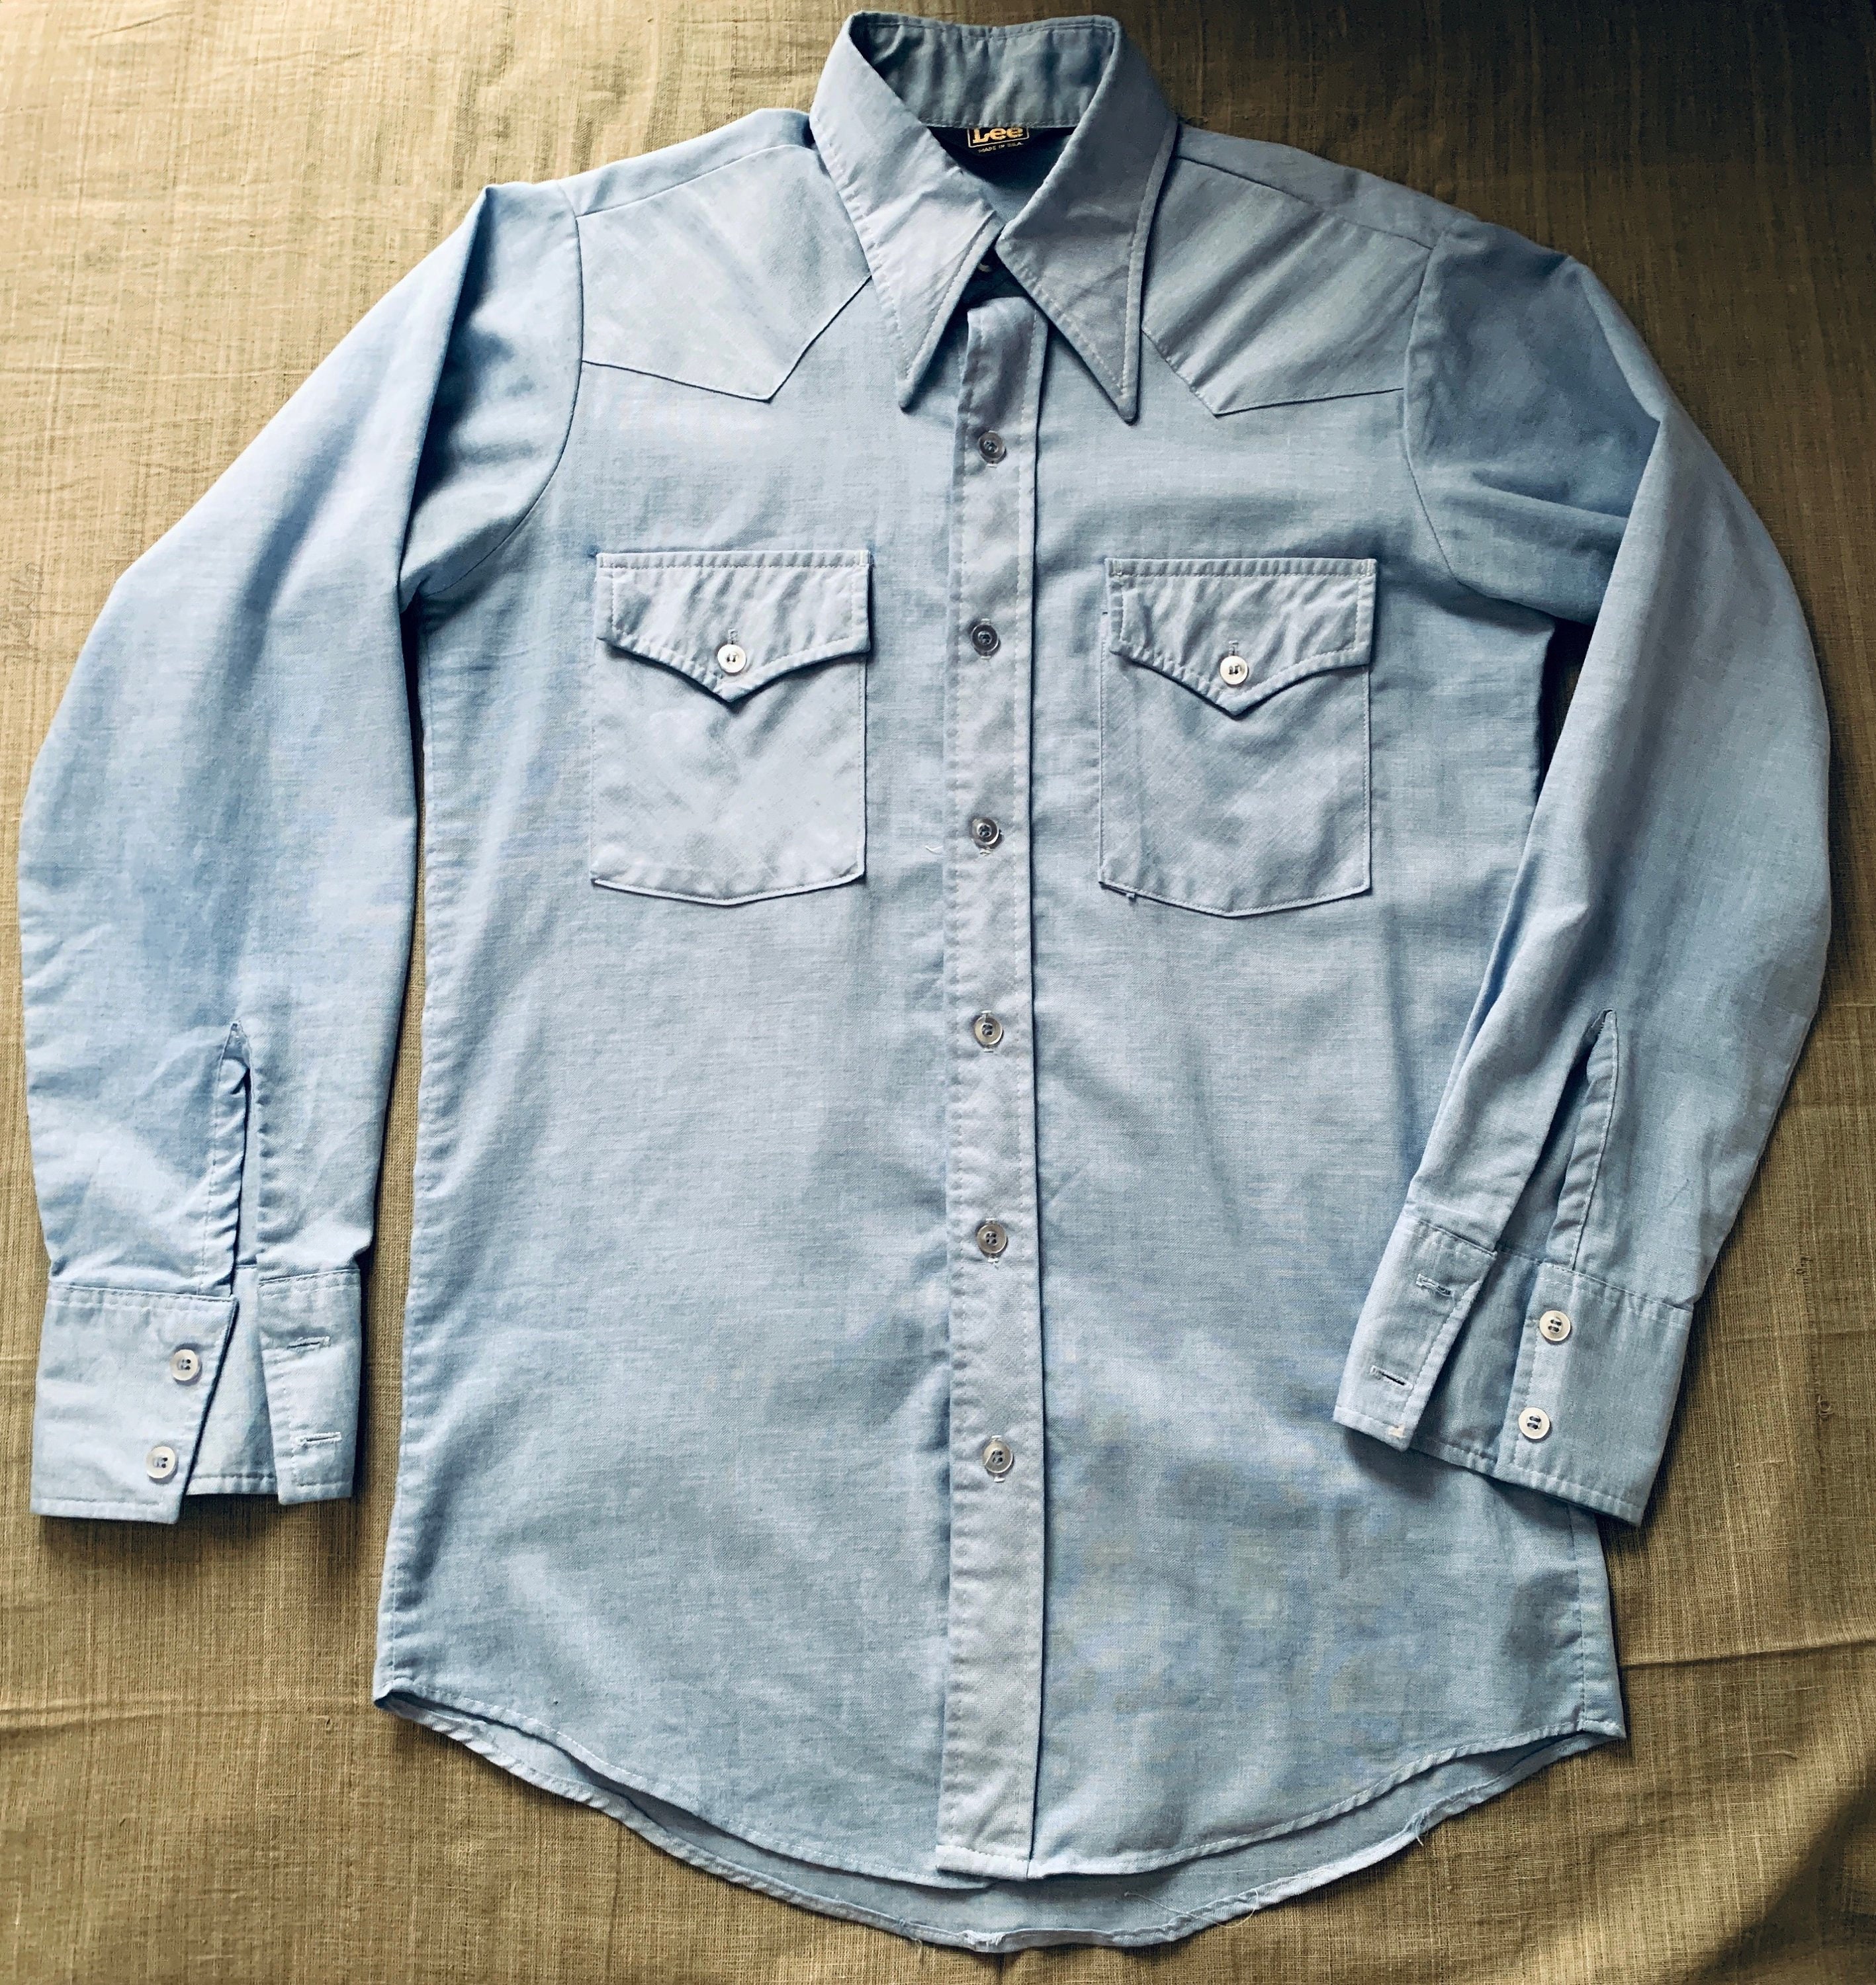 EAT THE RICH on Vintage Lee Chambray Shirt From 70's - Etsy